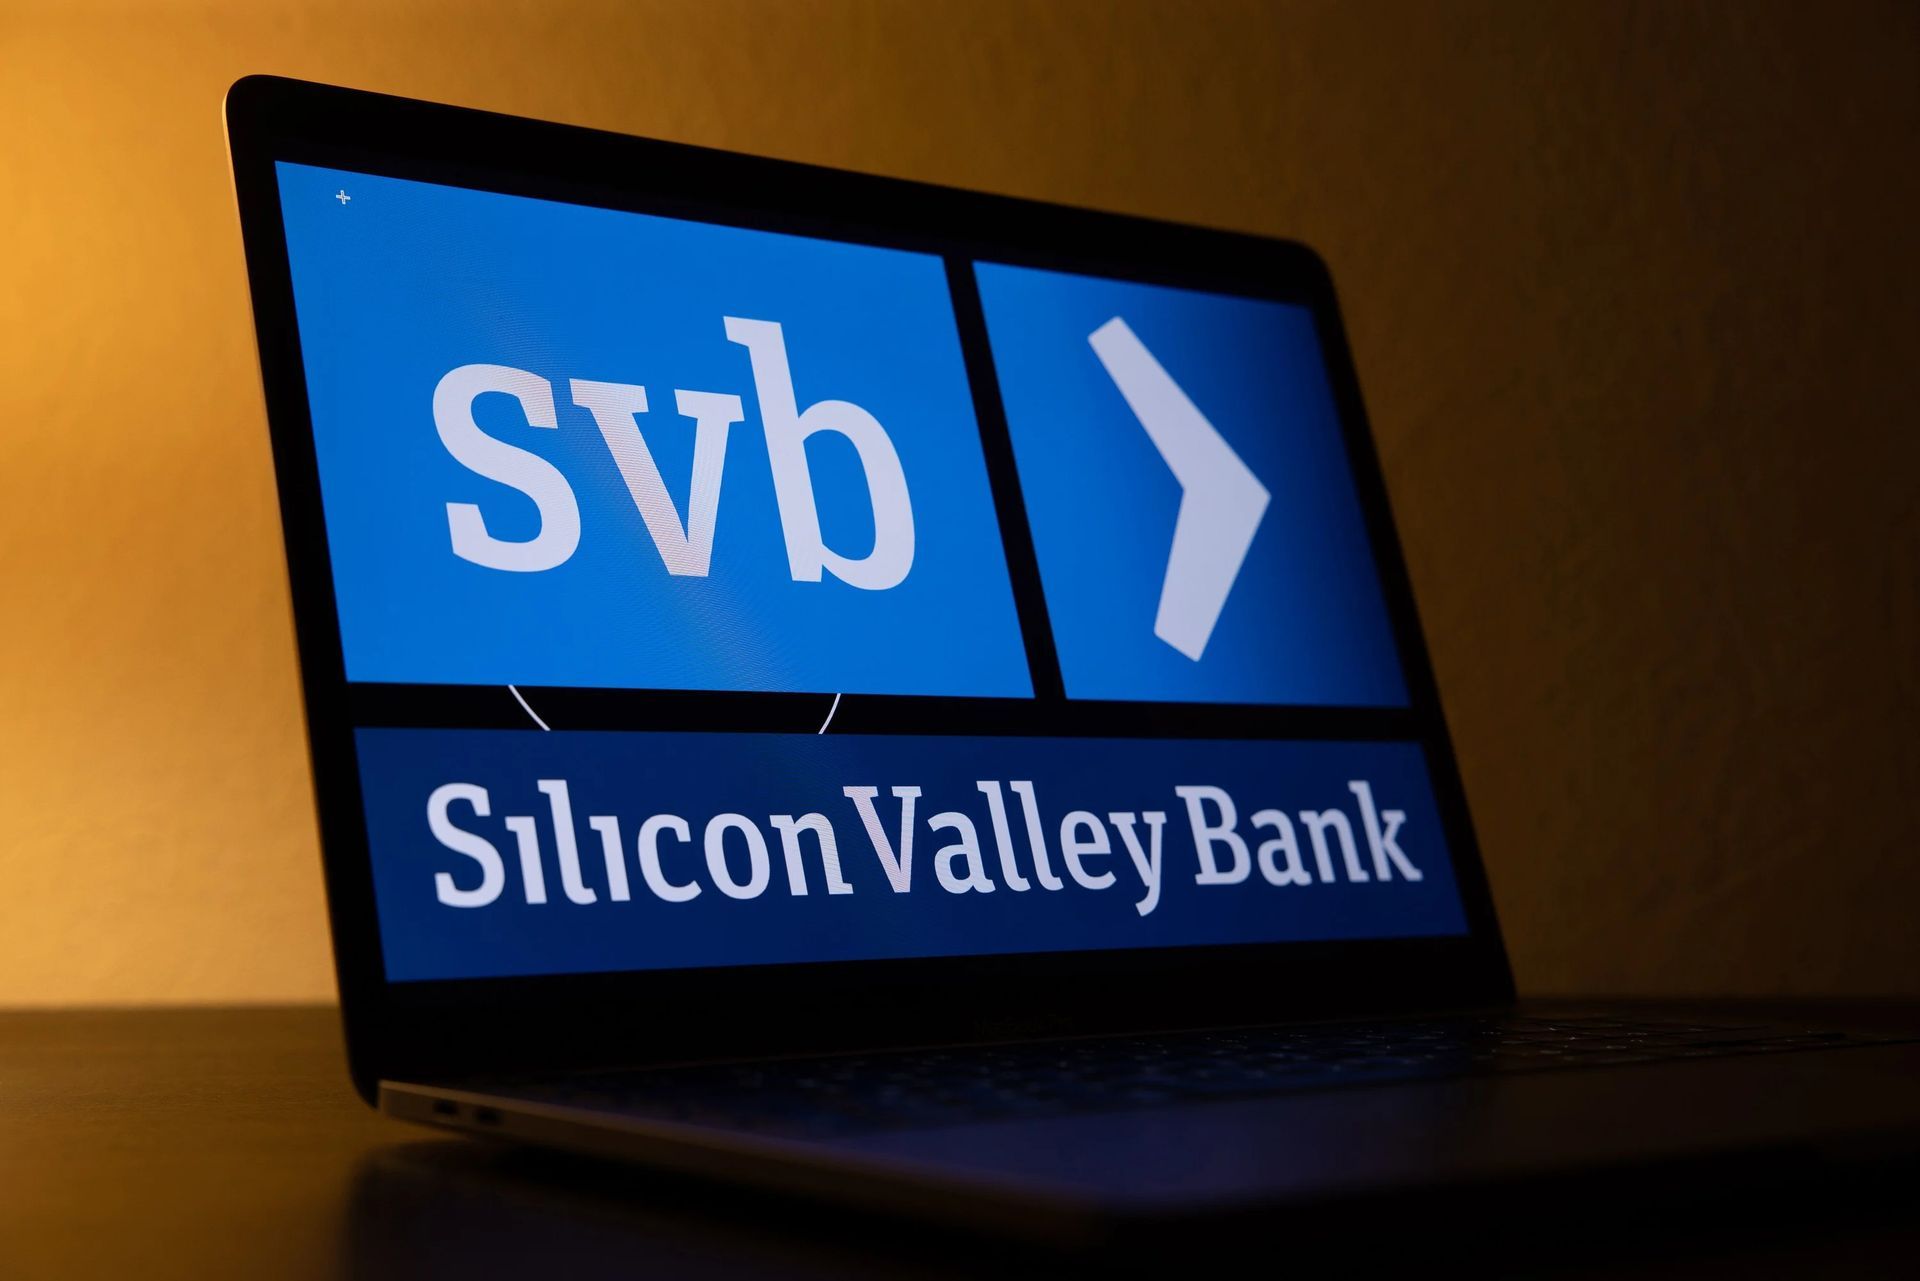 Exploring the SVB collapse: Behind the scenes